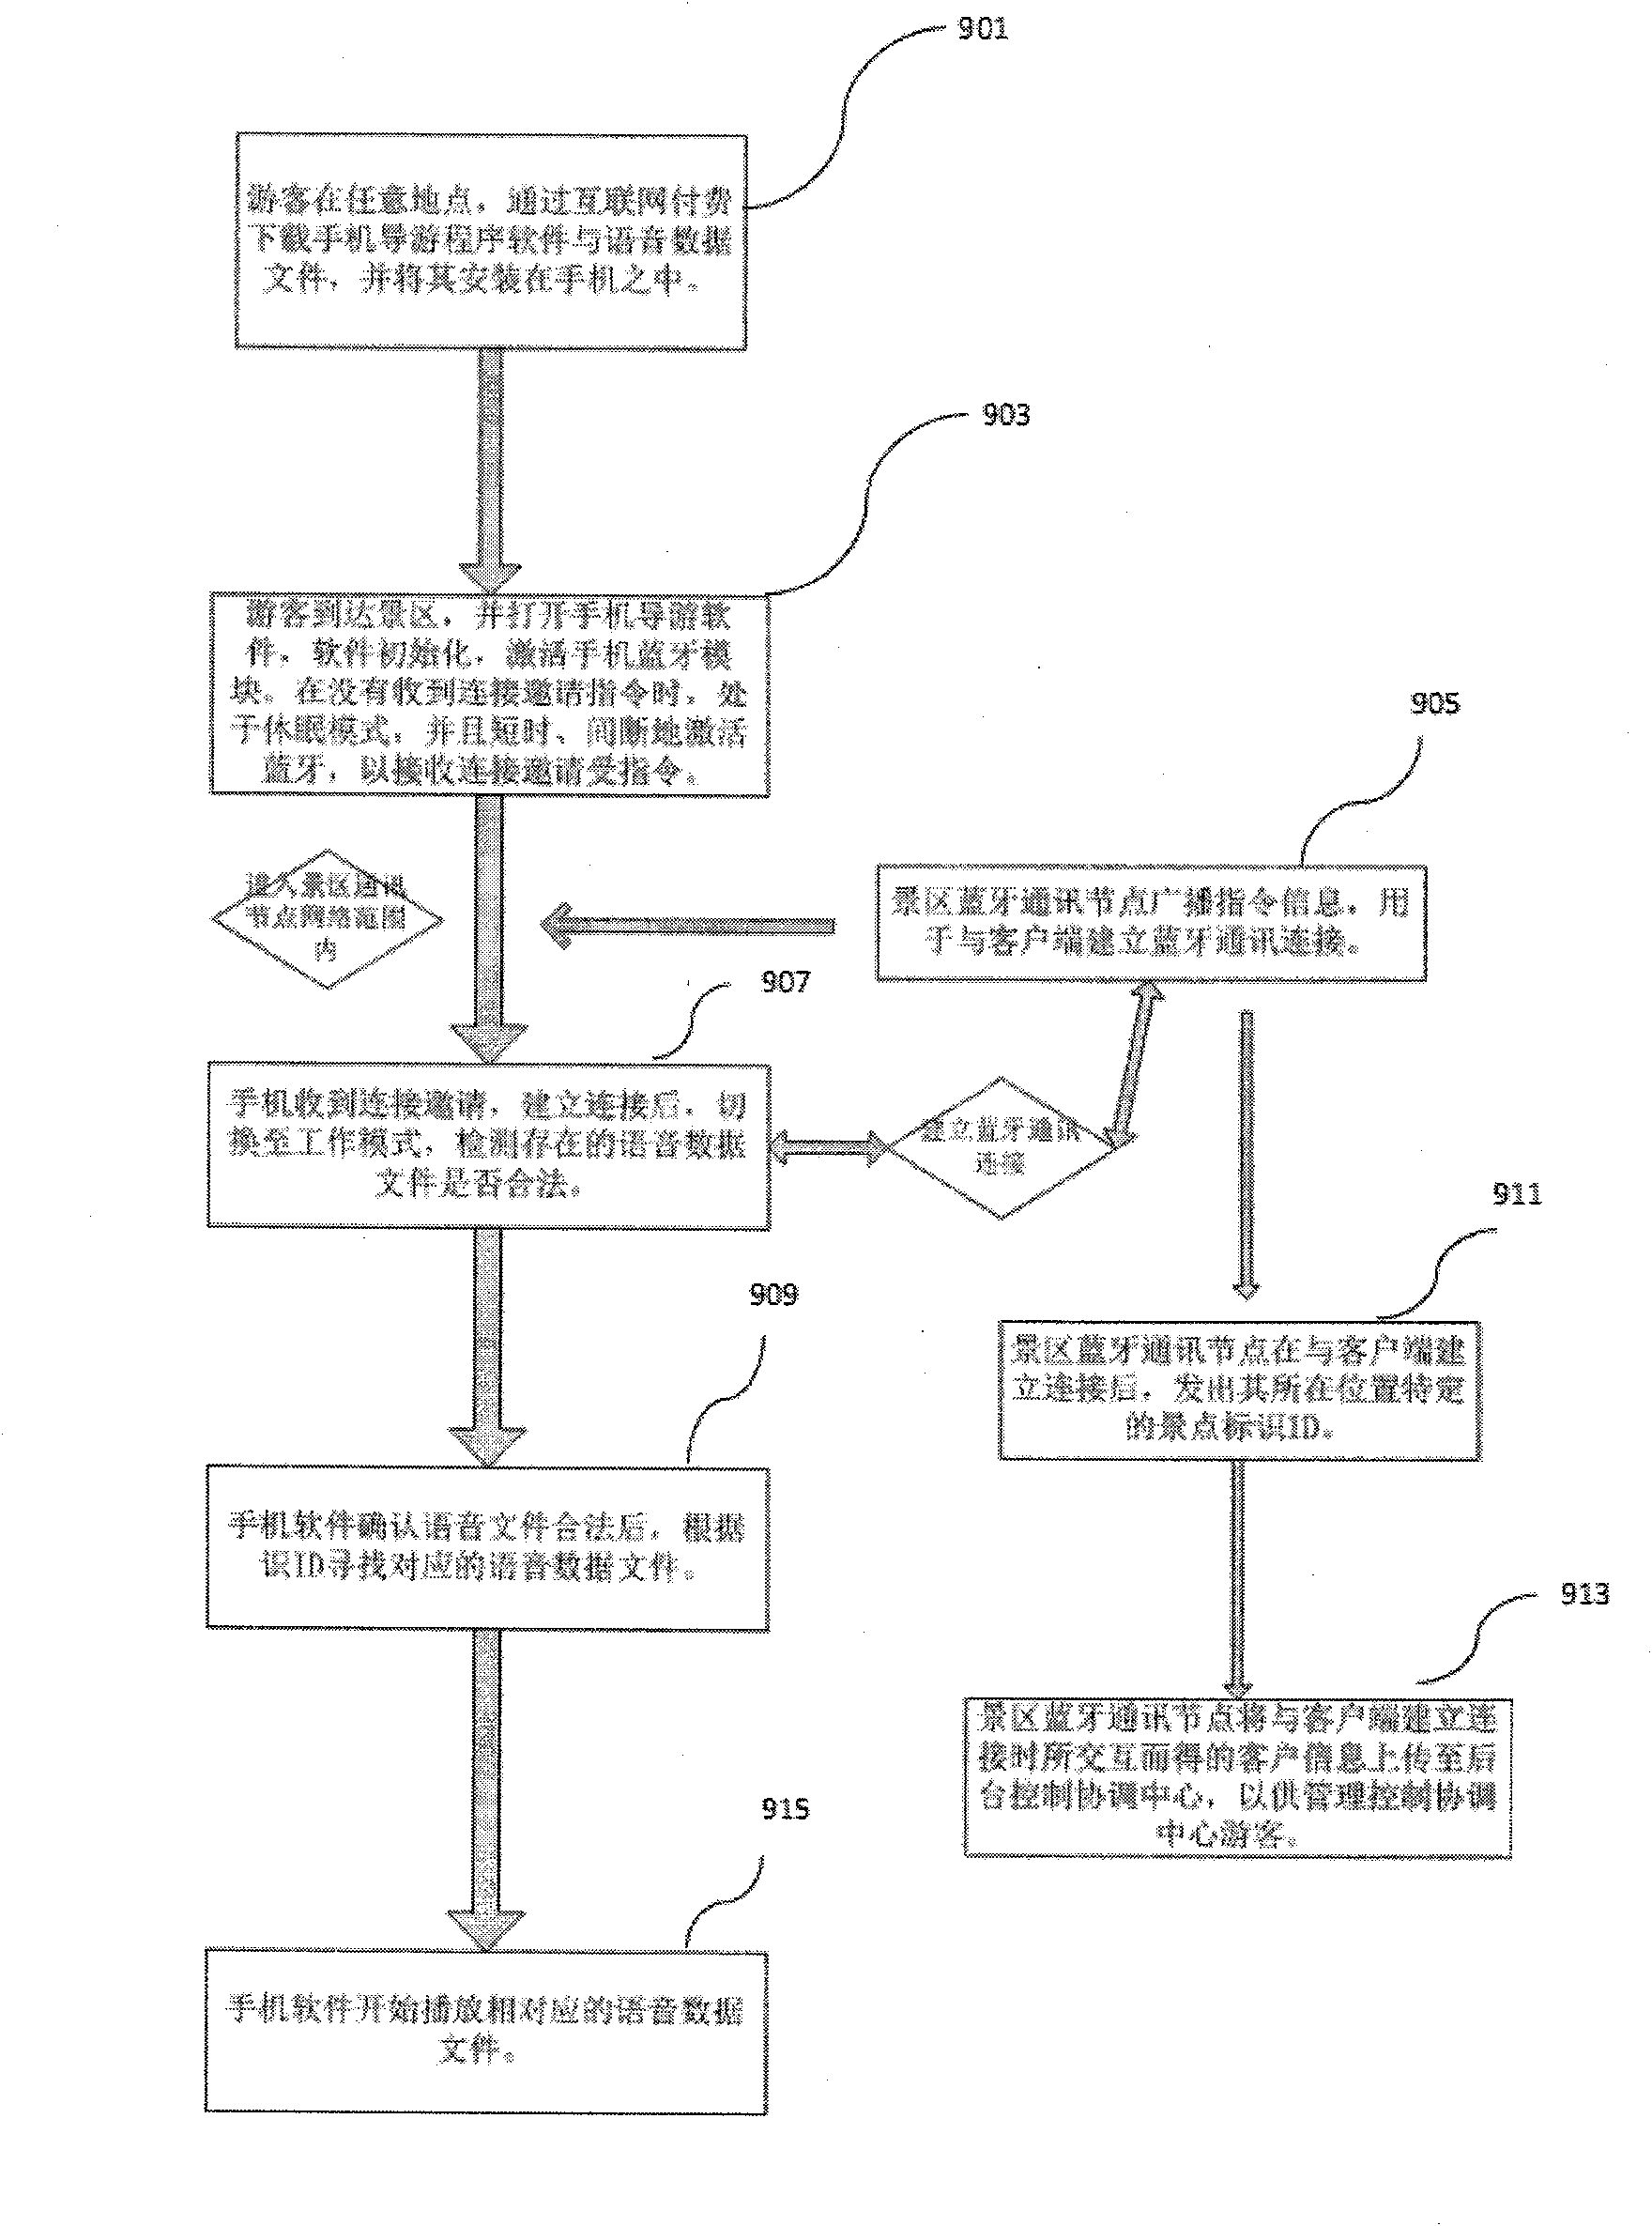 Electronic tour guide system and method based on bluetooth technology